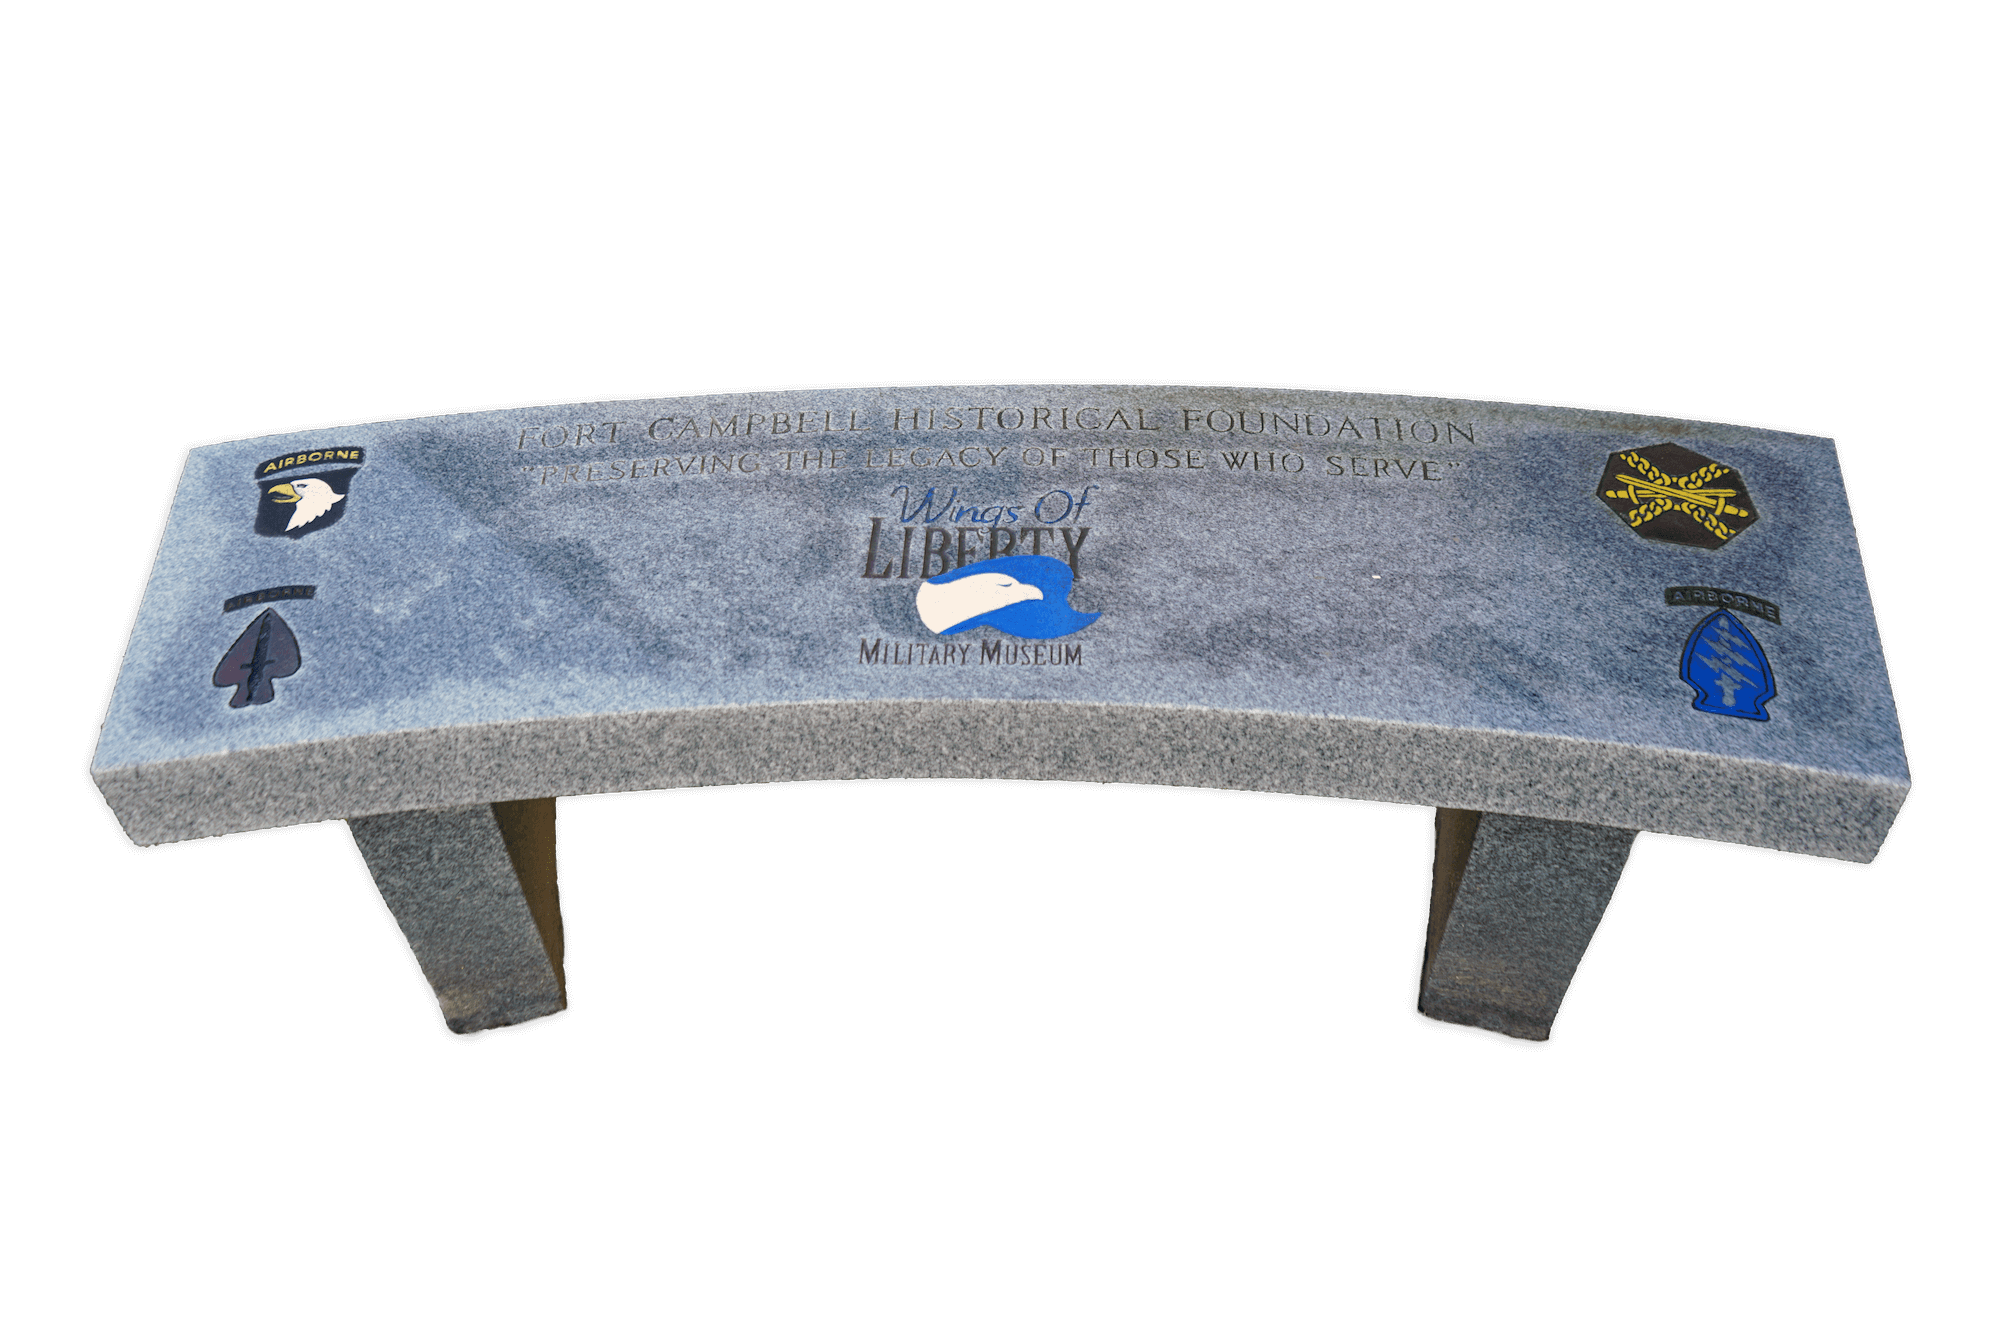 Wings of Liberty commemorative bench. Fort Campbell in KY